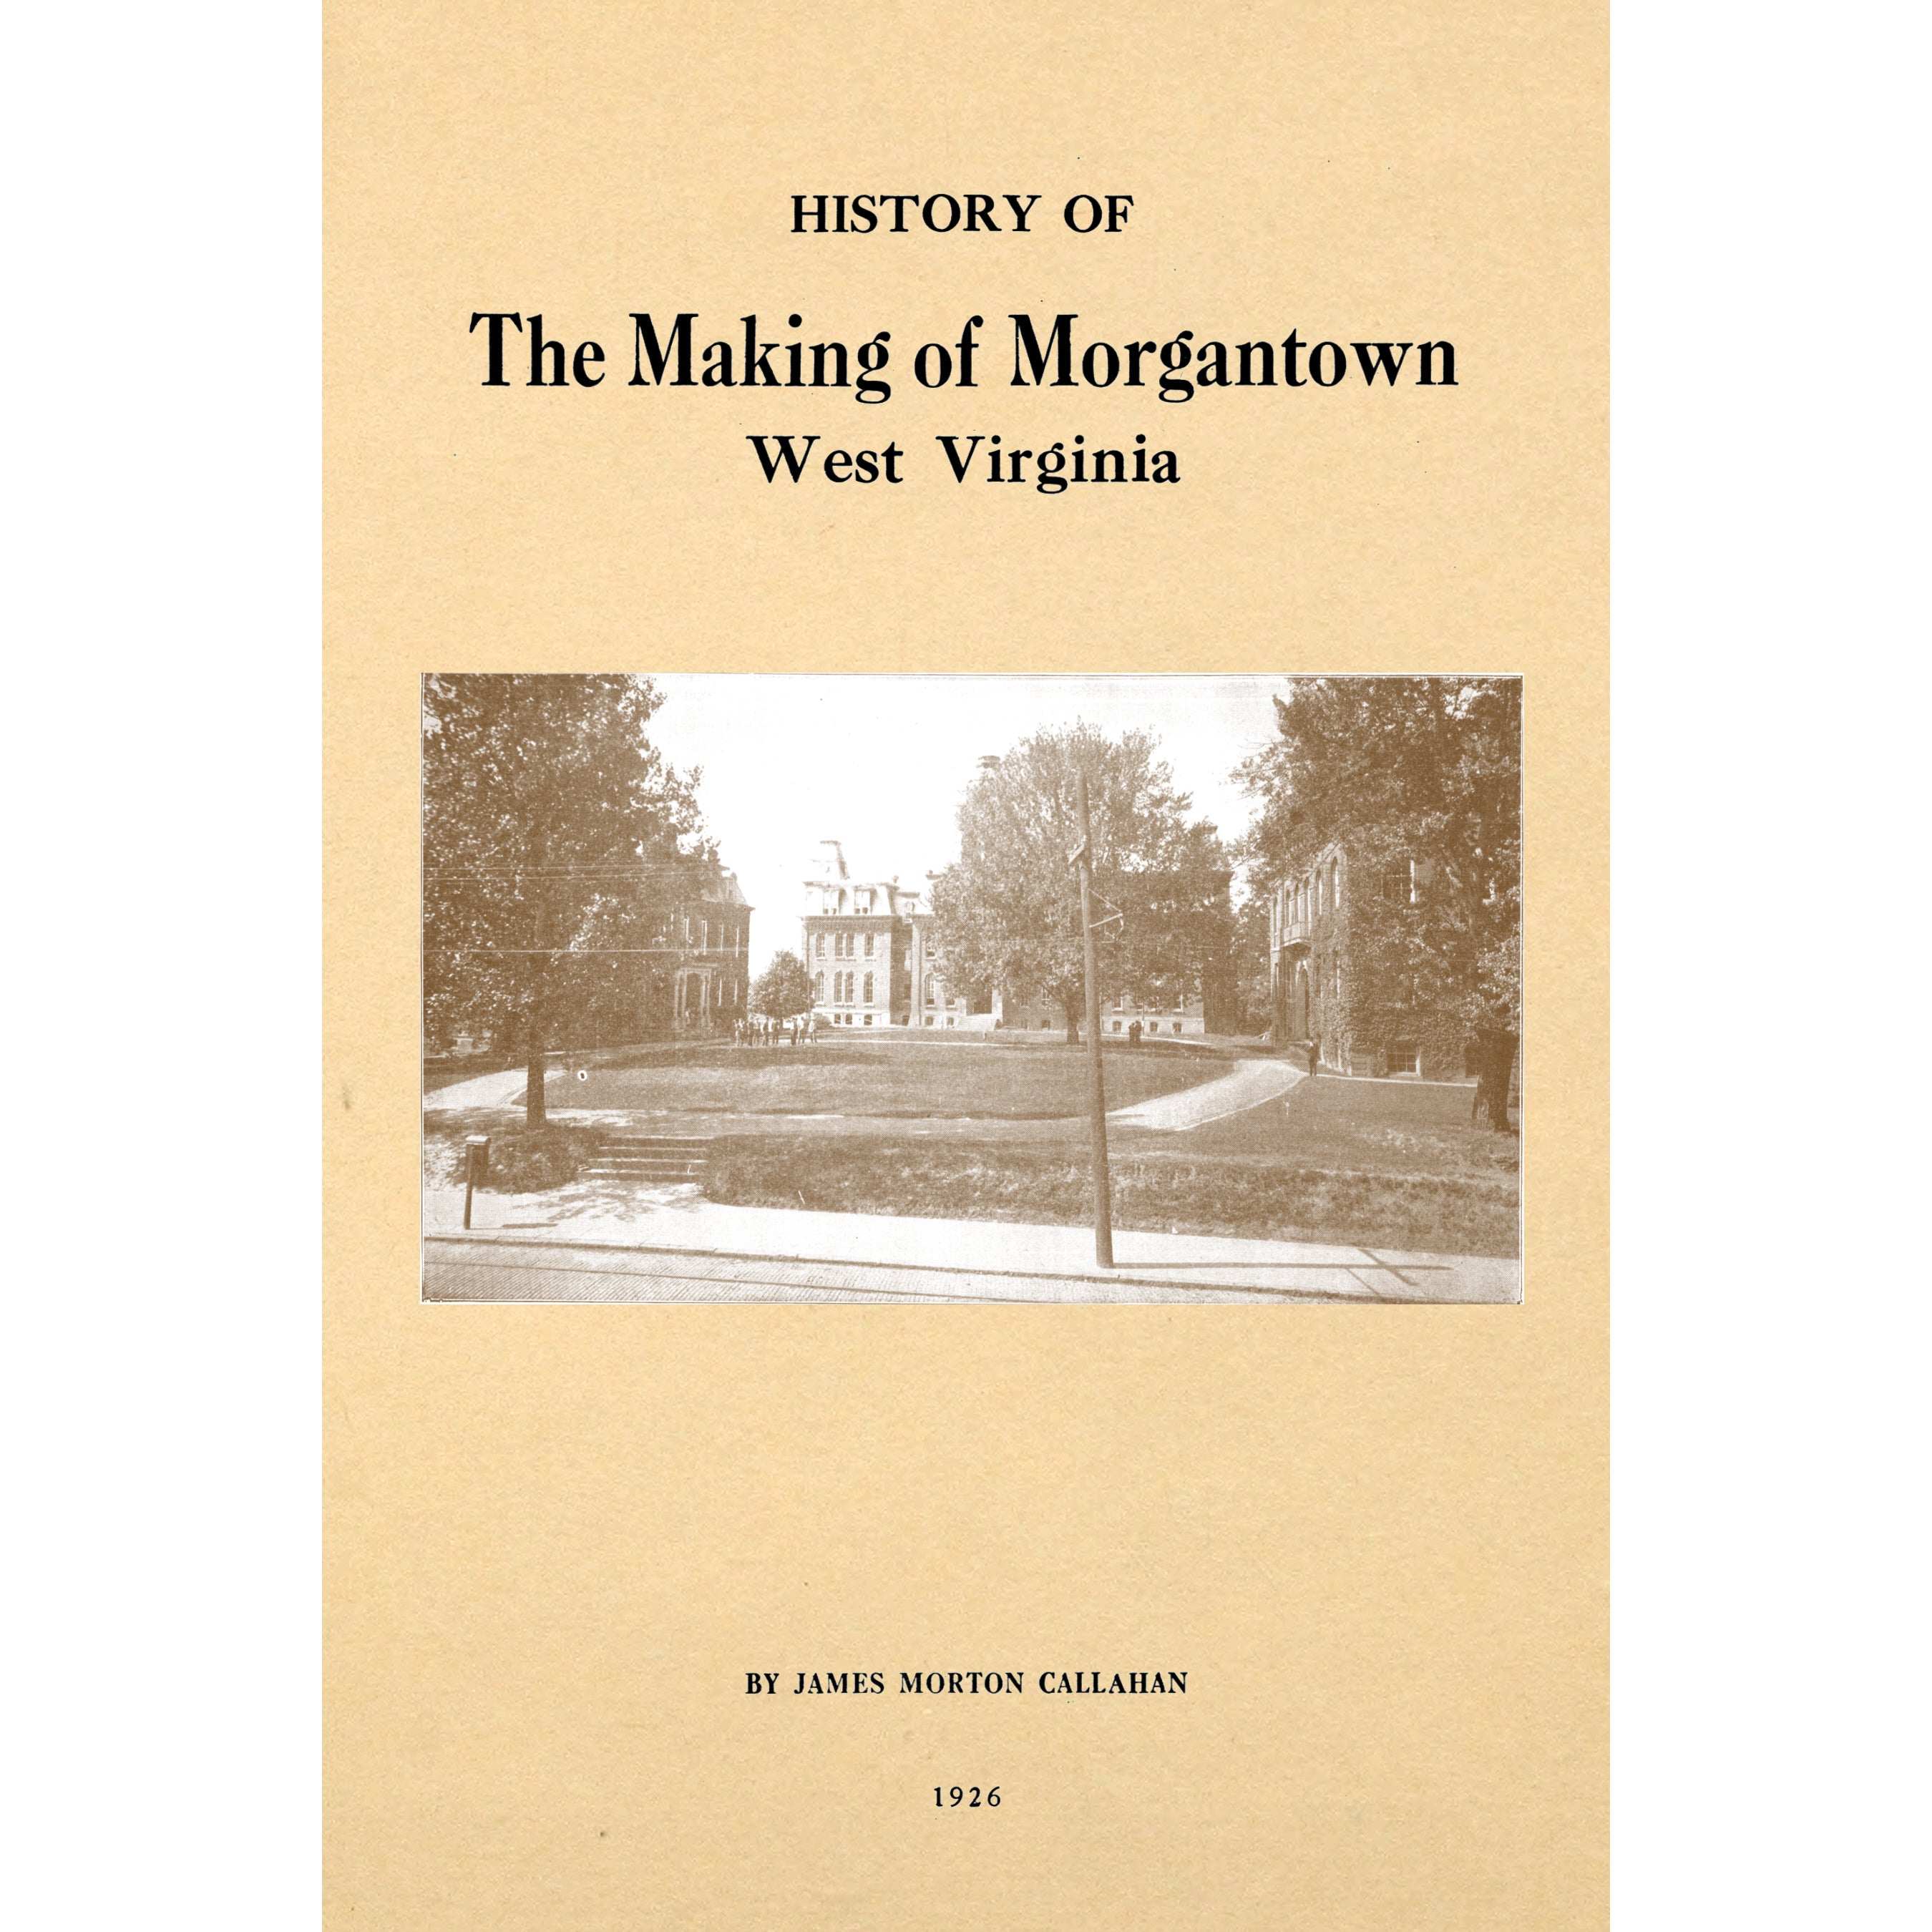 History of The Making of Morgantown, West Virginia;